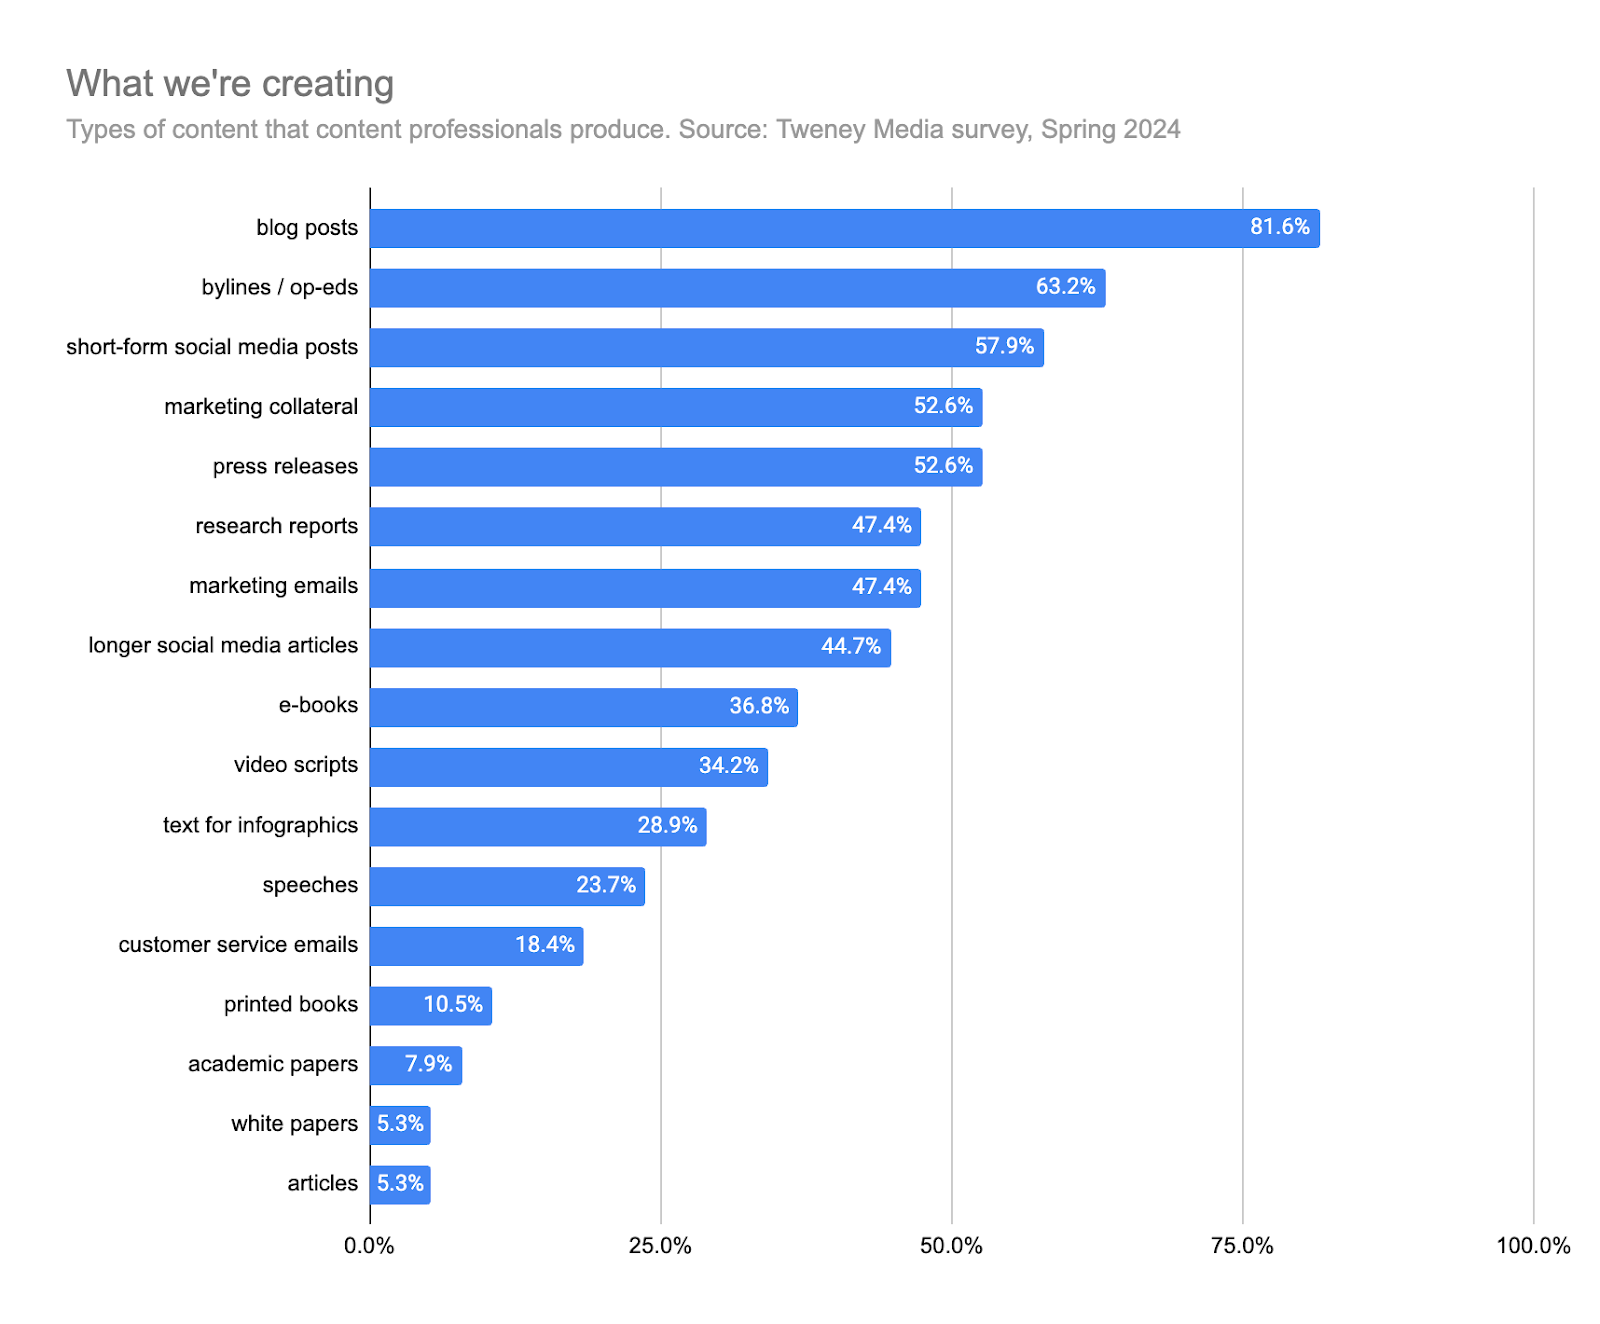 Bar chart showing the types of content that content professionals produce, from blog posts and bylines to academic papers, white papers, and articles